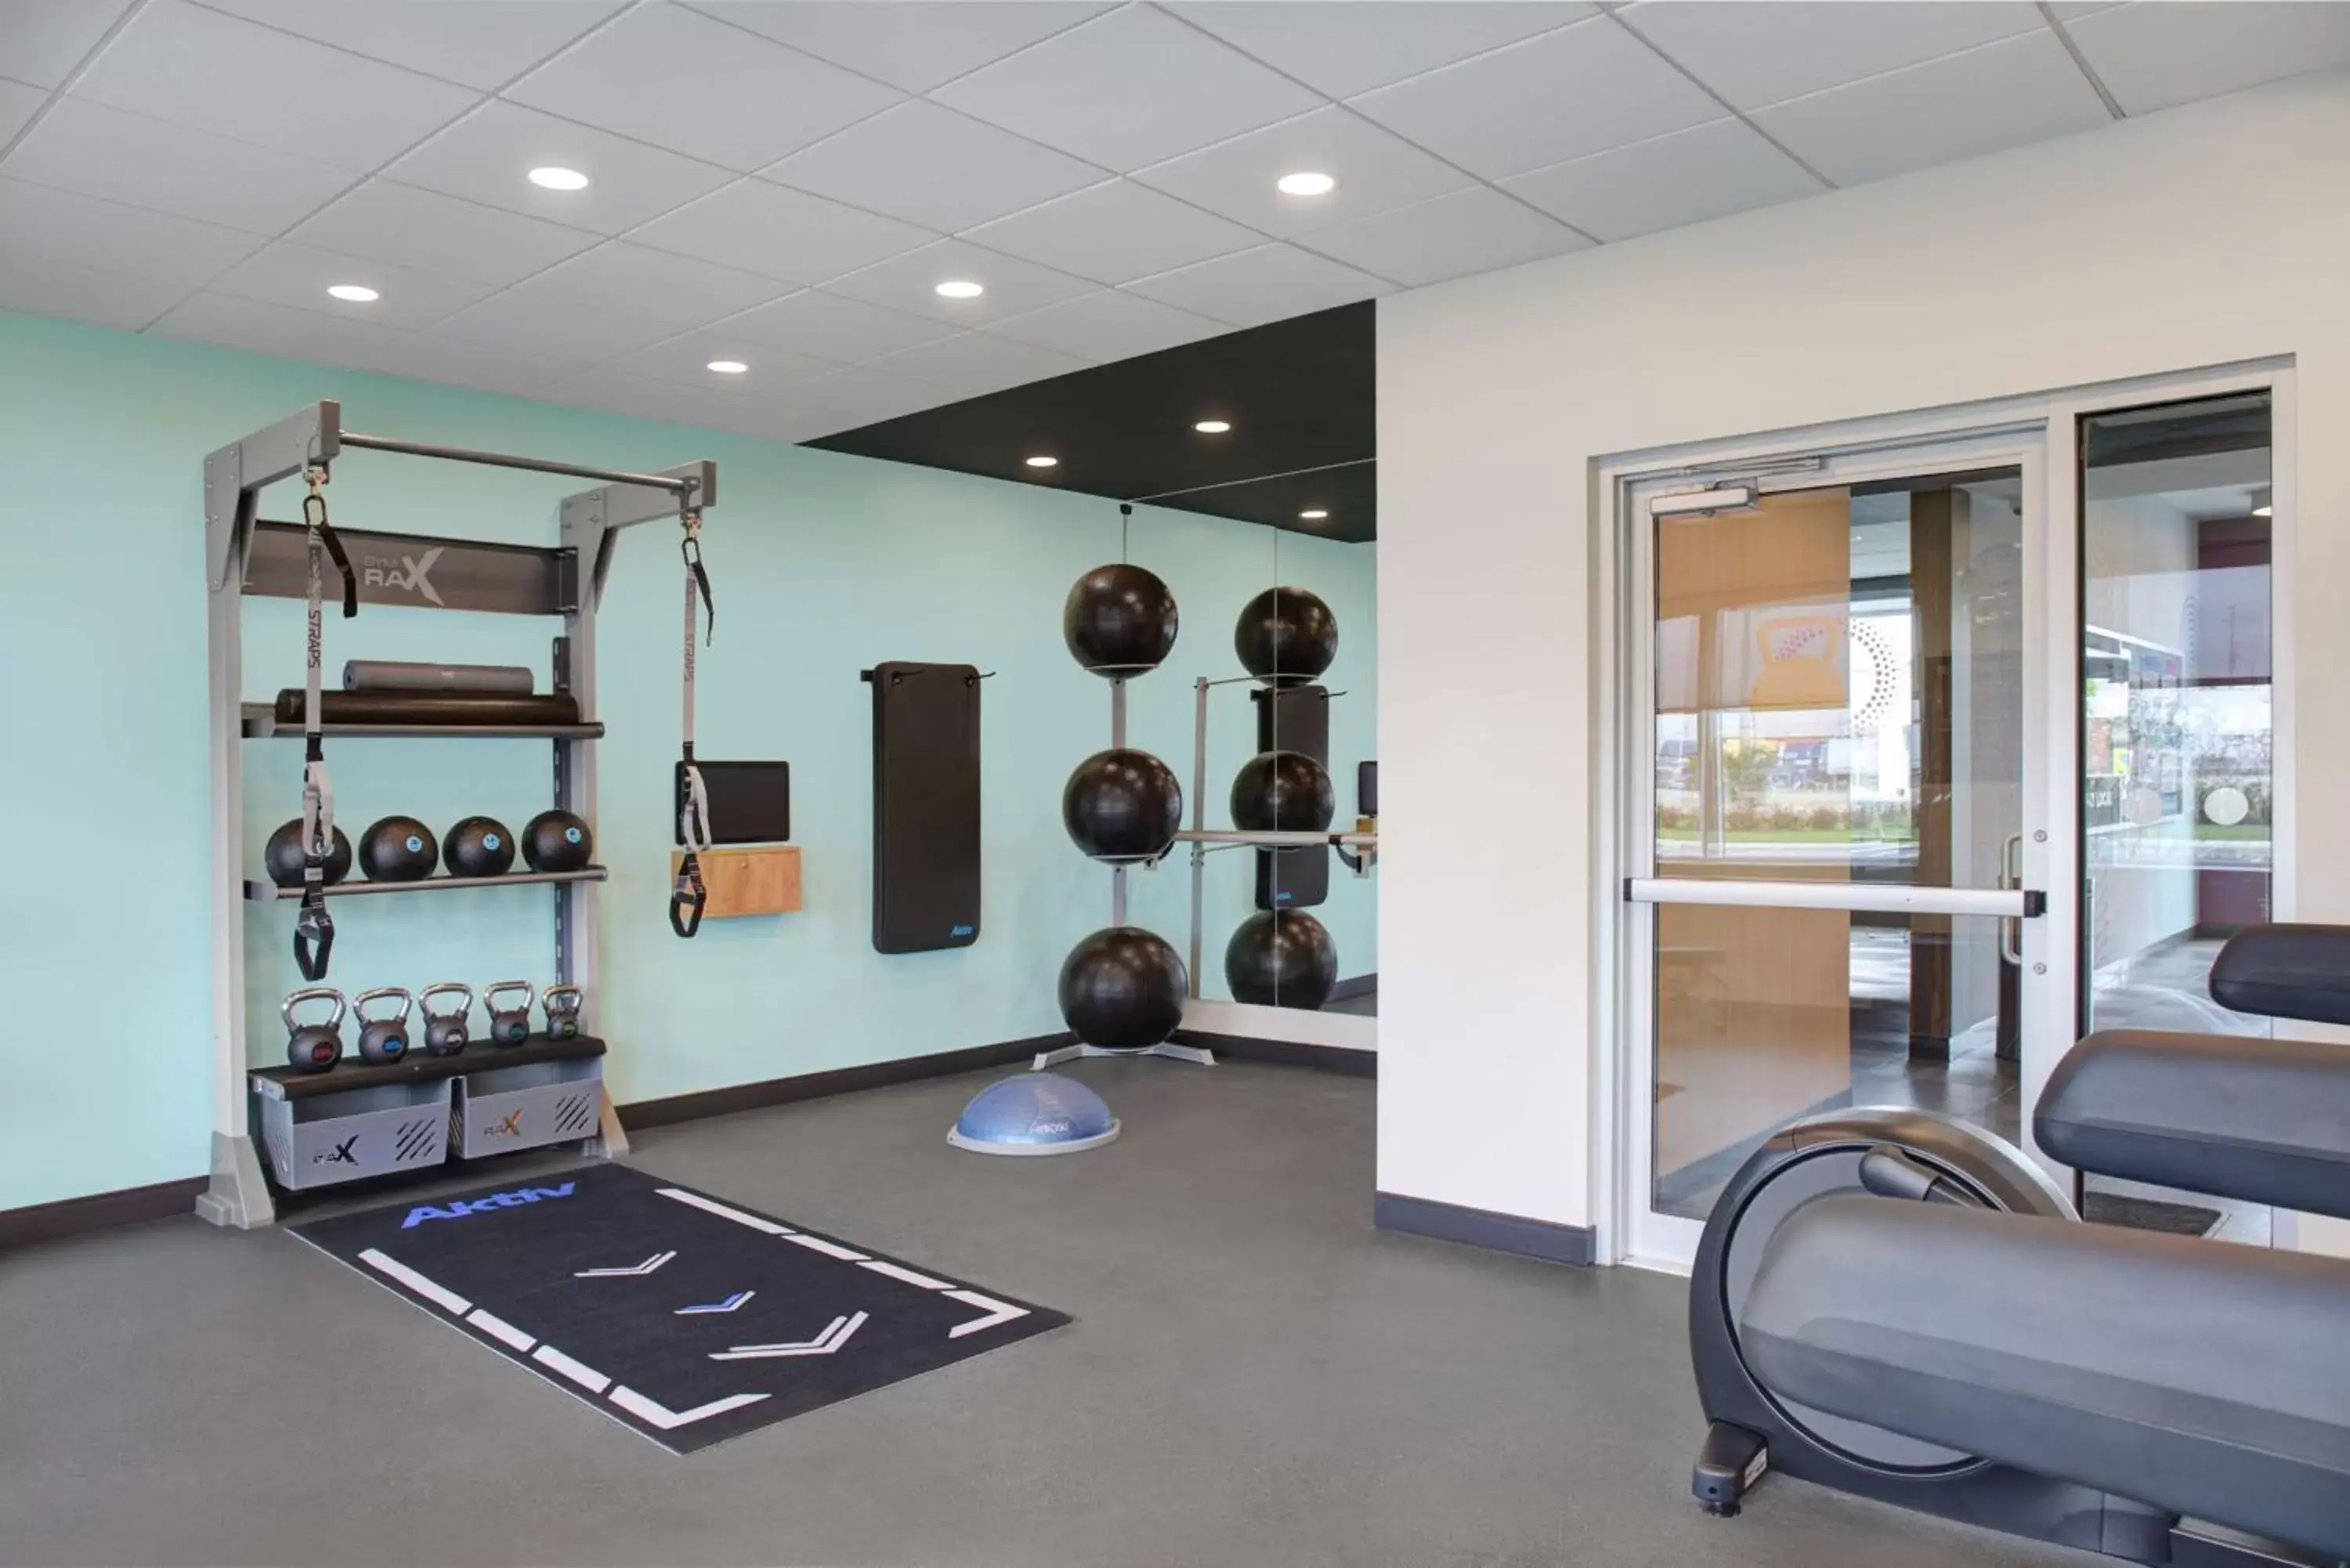 Fitness centre/facilities, Fitness Center/Facilities in Tru By Hilton Toronto Airport West